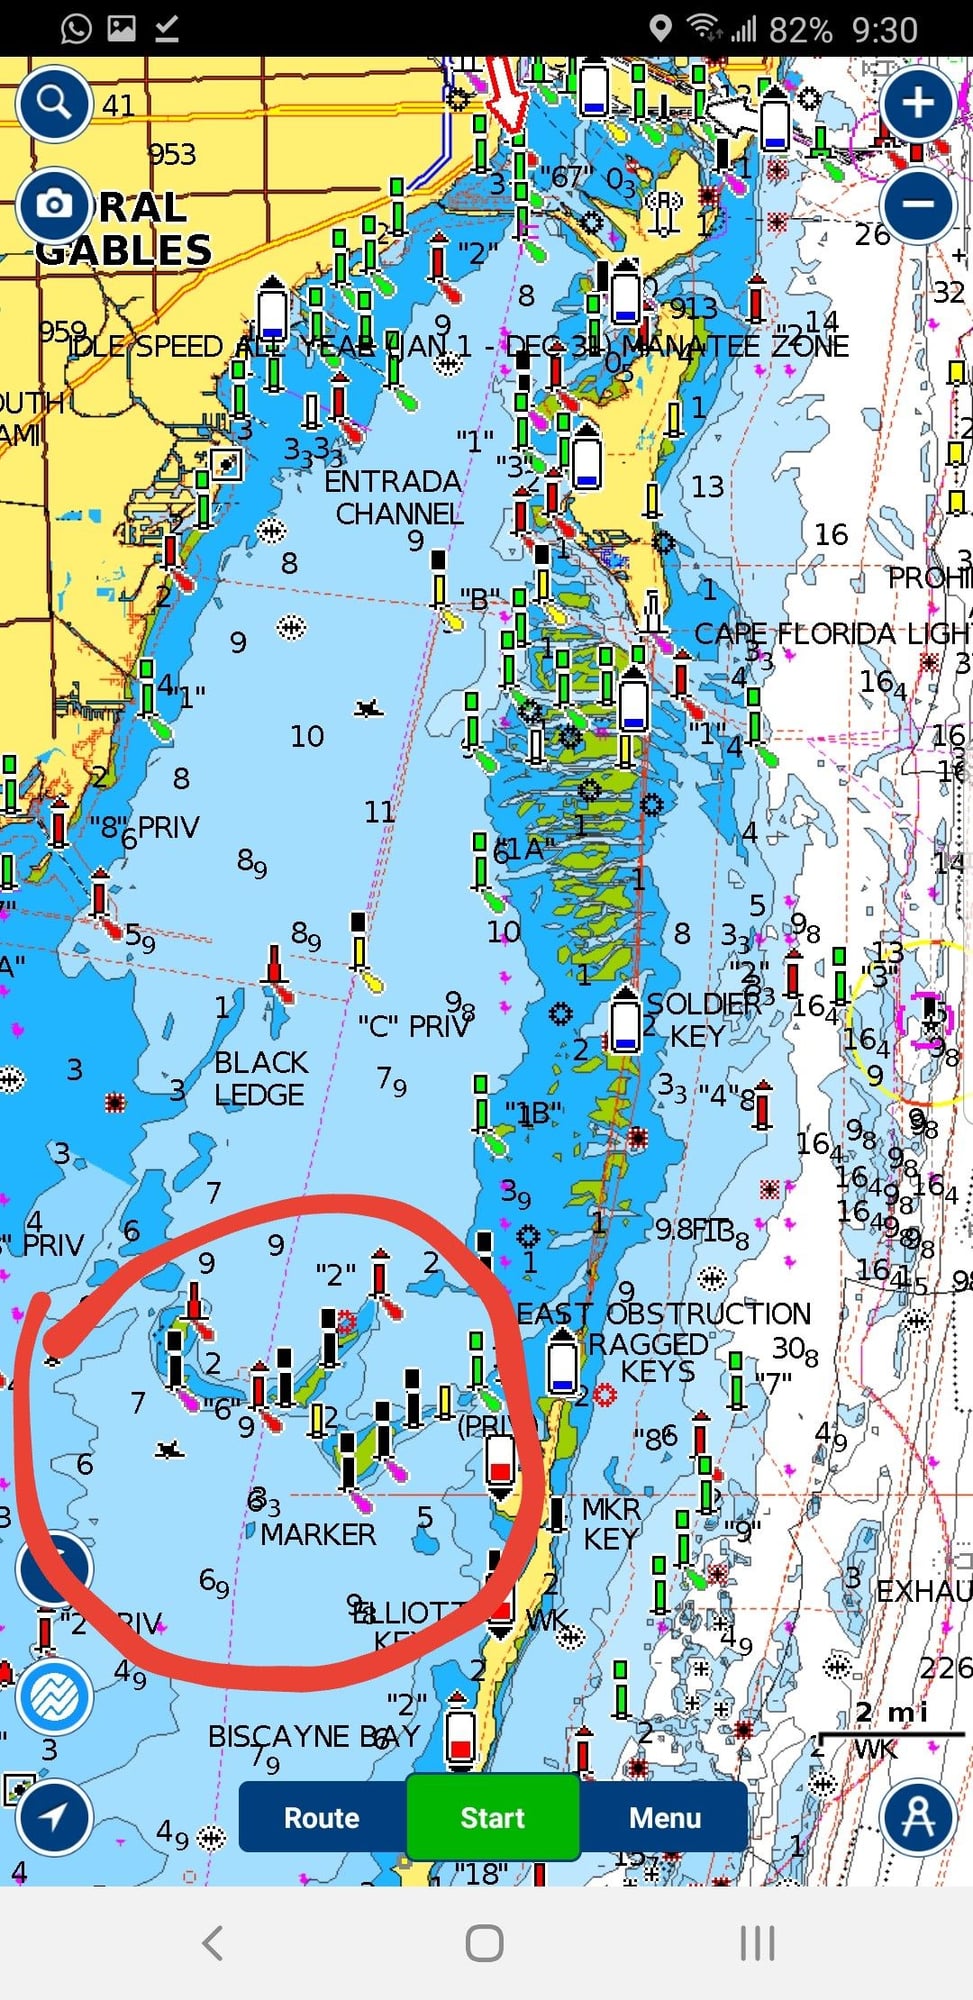 Crossing Biscayne Bay to get to the northern Keys? - The Hull Truth -  Boating and Fishing Forum